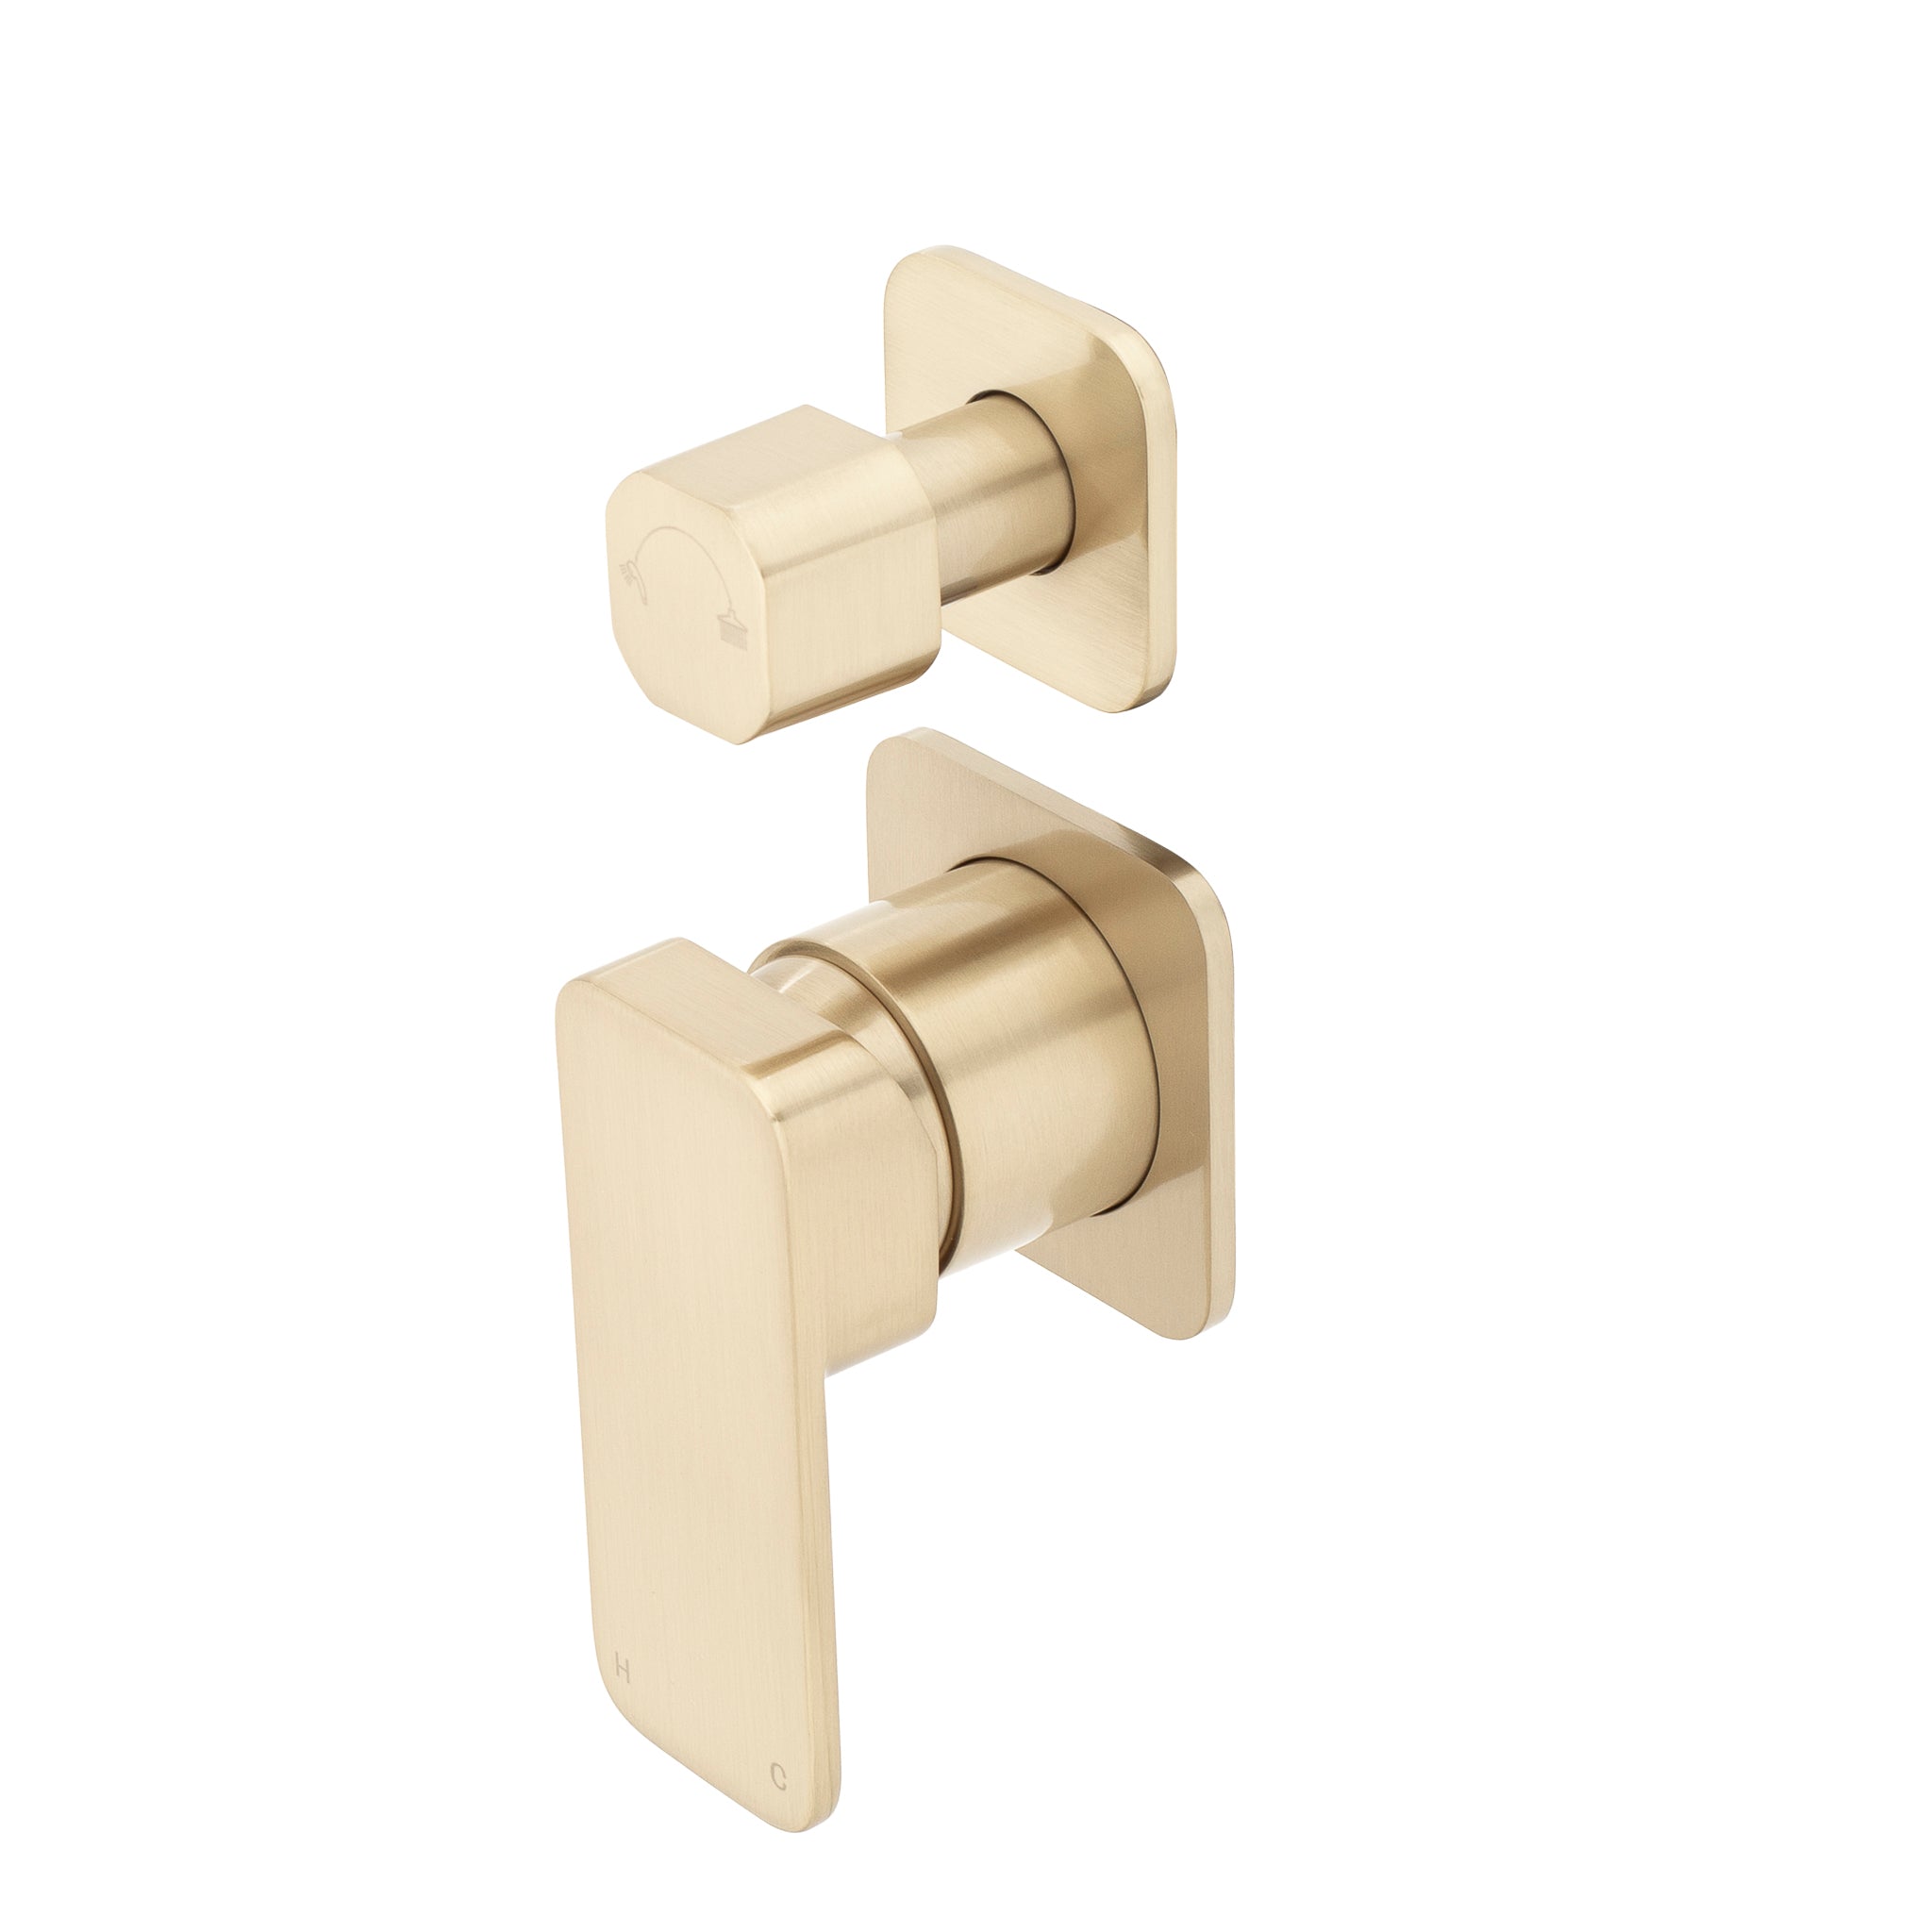 Kiki Shower/ Bath Wall Mixer with Diverter and Square Plates, Brushed Brass (Gold)